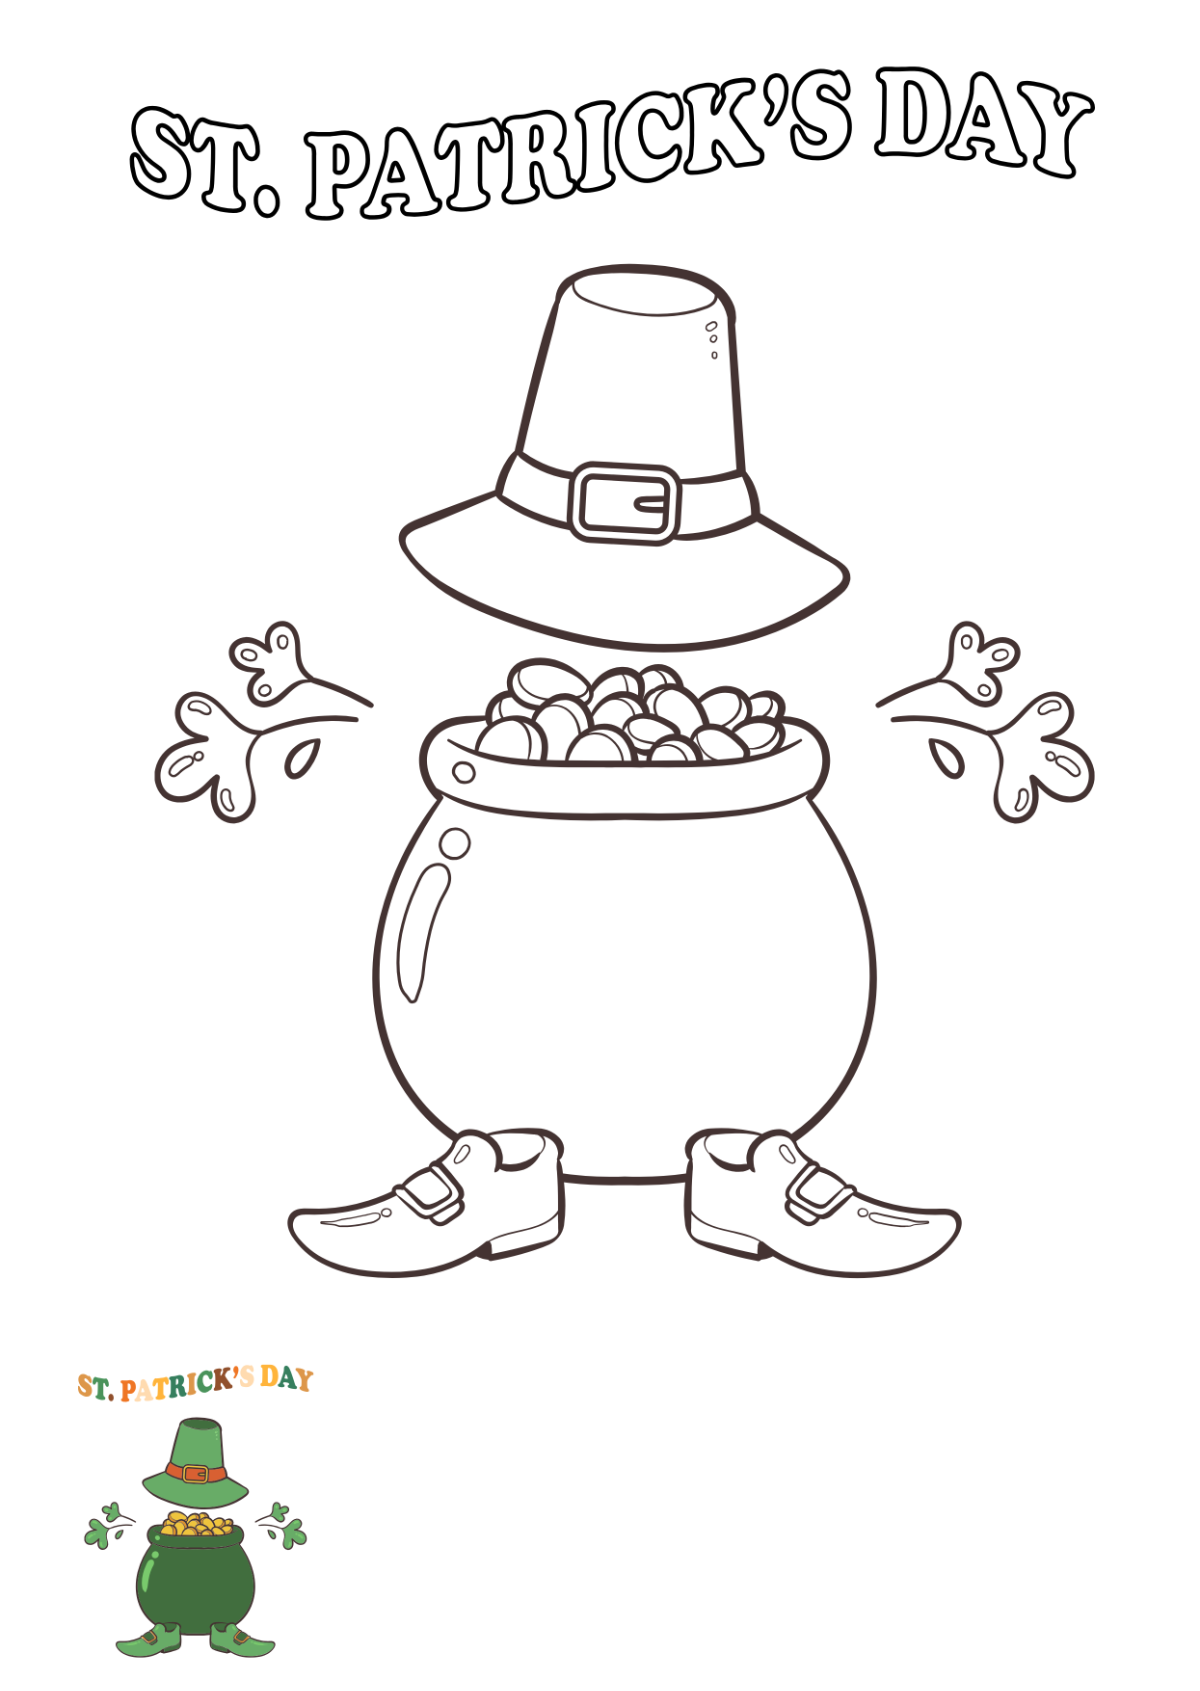 St. Patrick’s Day Coloring Page for Kids